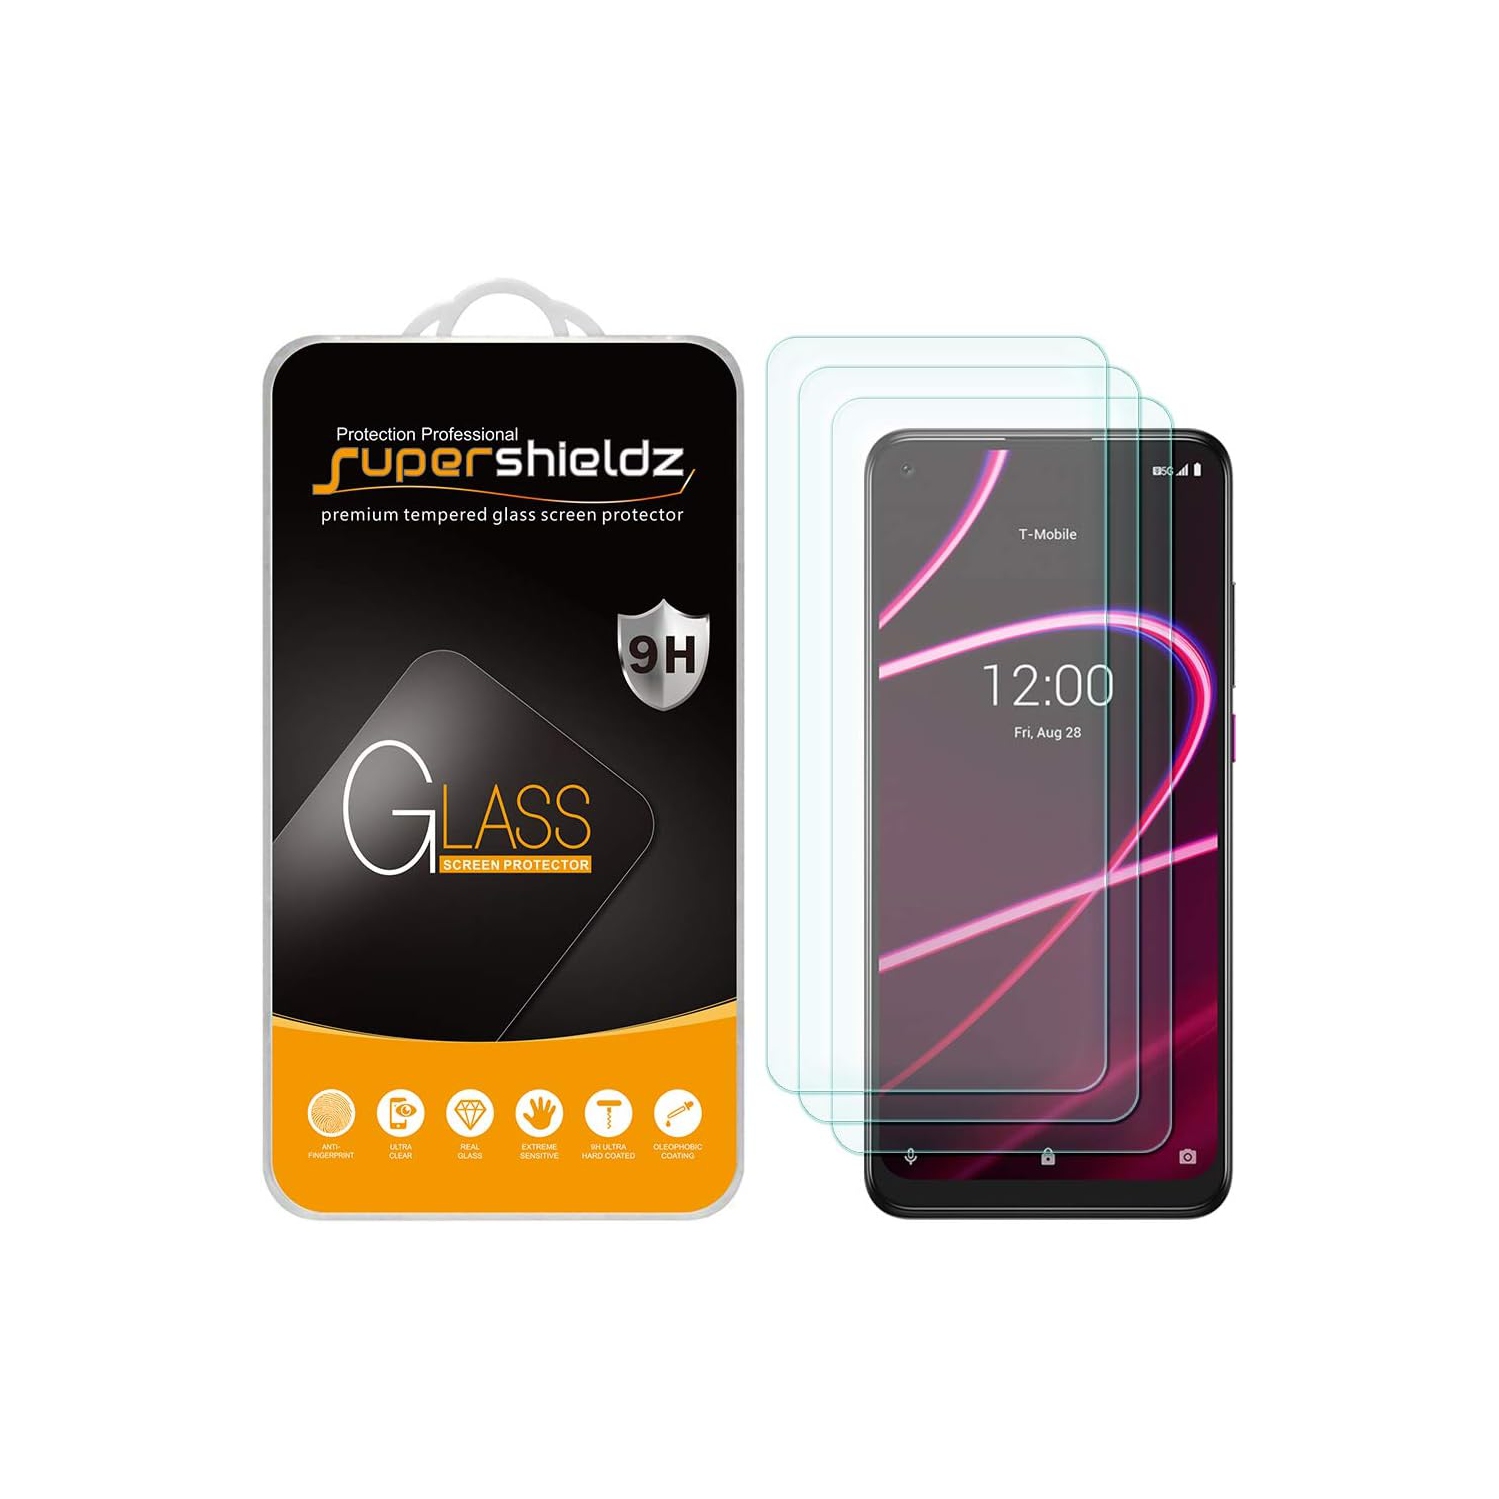 (3 Pack) for T-Mobile (Revvl 5G) Tempered Glass Screen Protector, Anti Scratch, Bubble Free